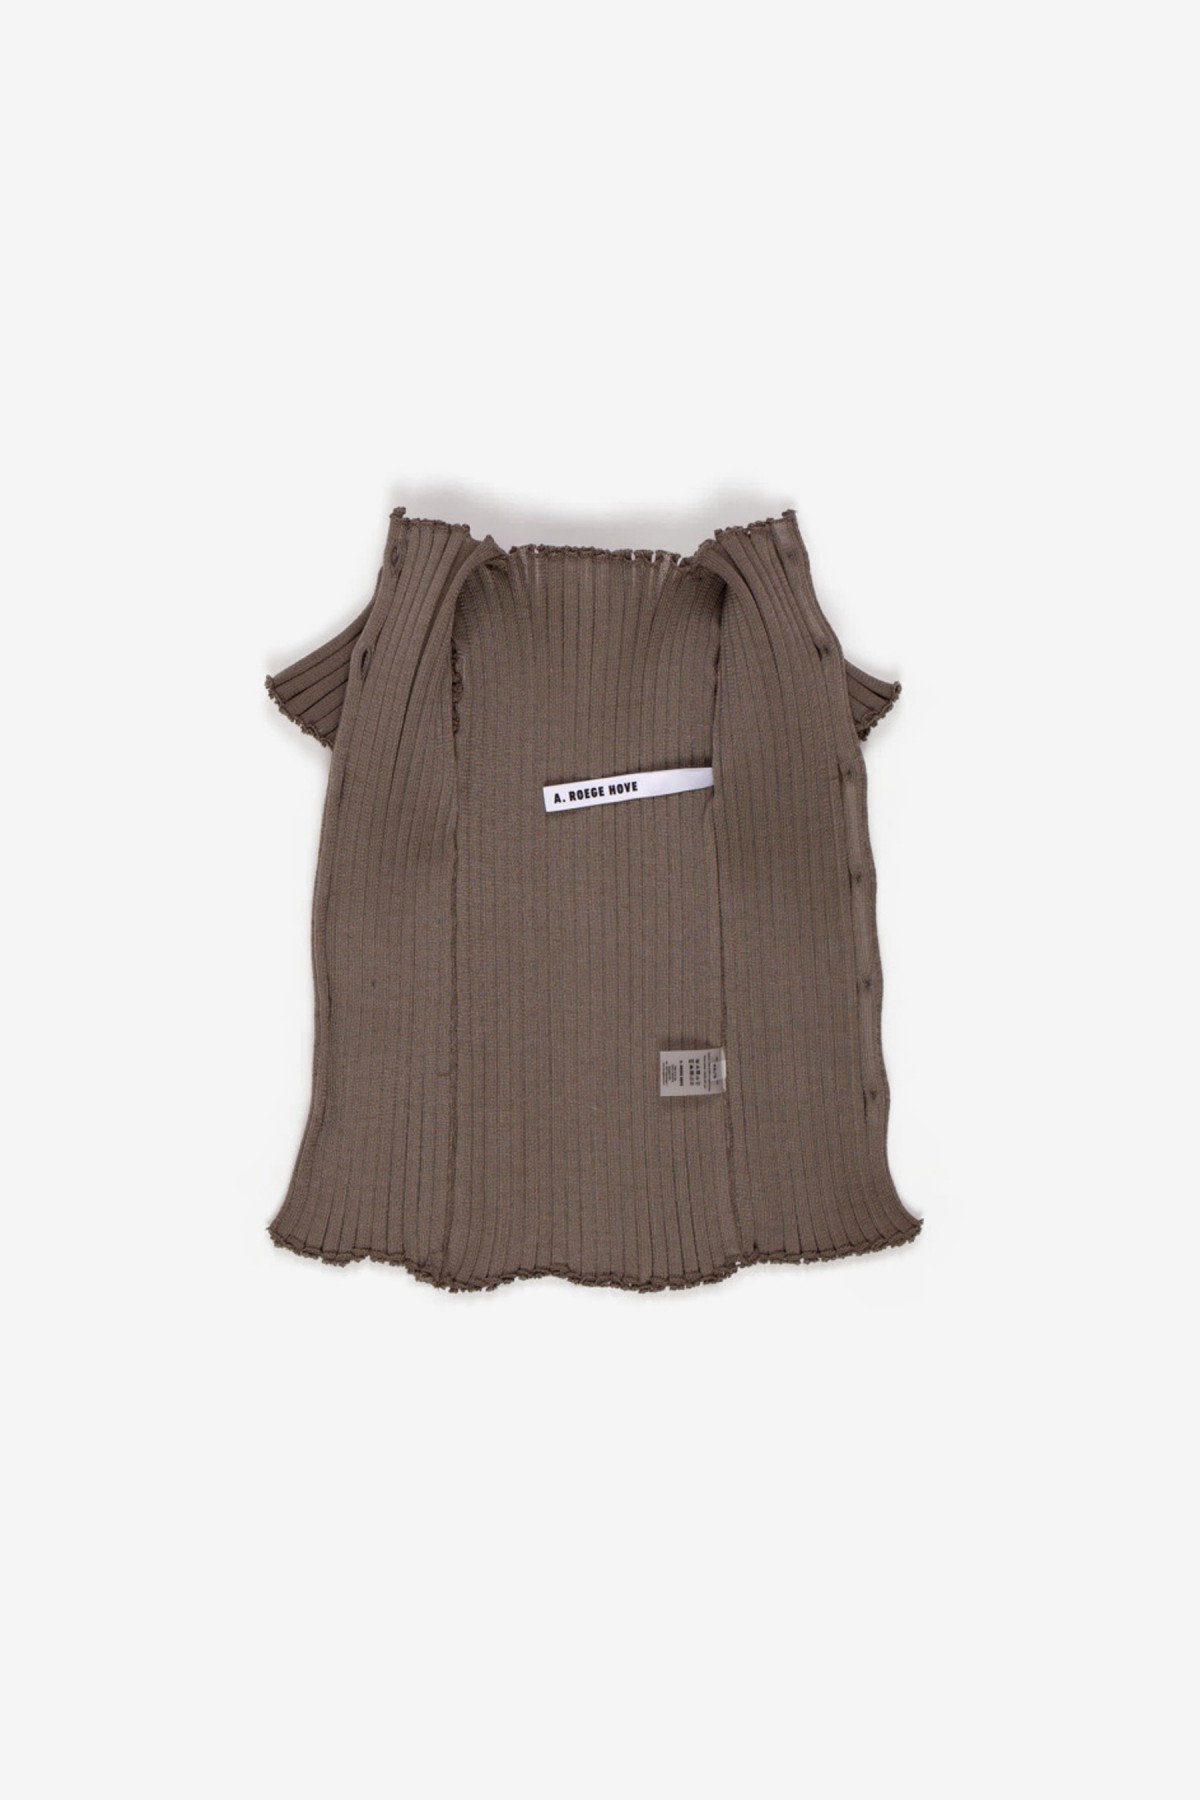 A. Roege Hove Katrine Short Sleeve Cardigan in Taupe